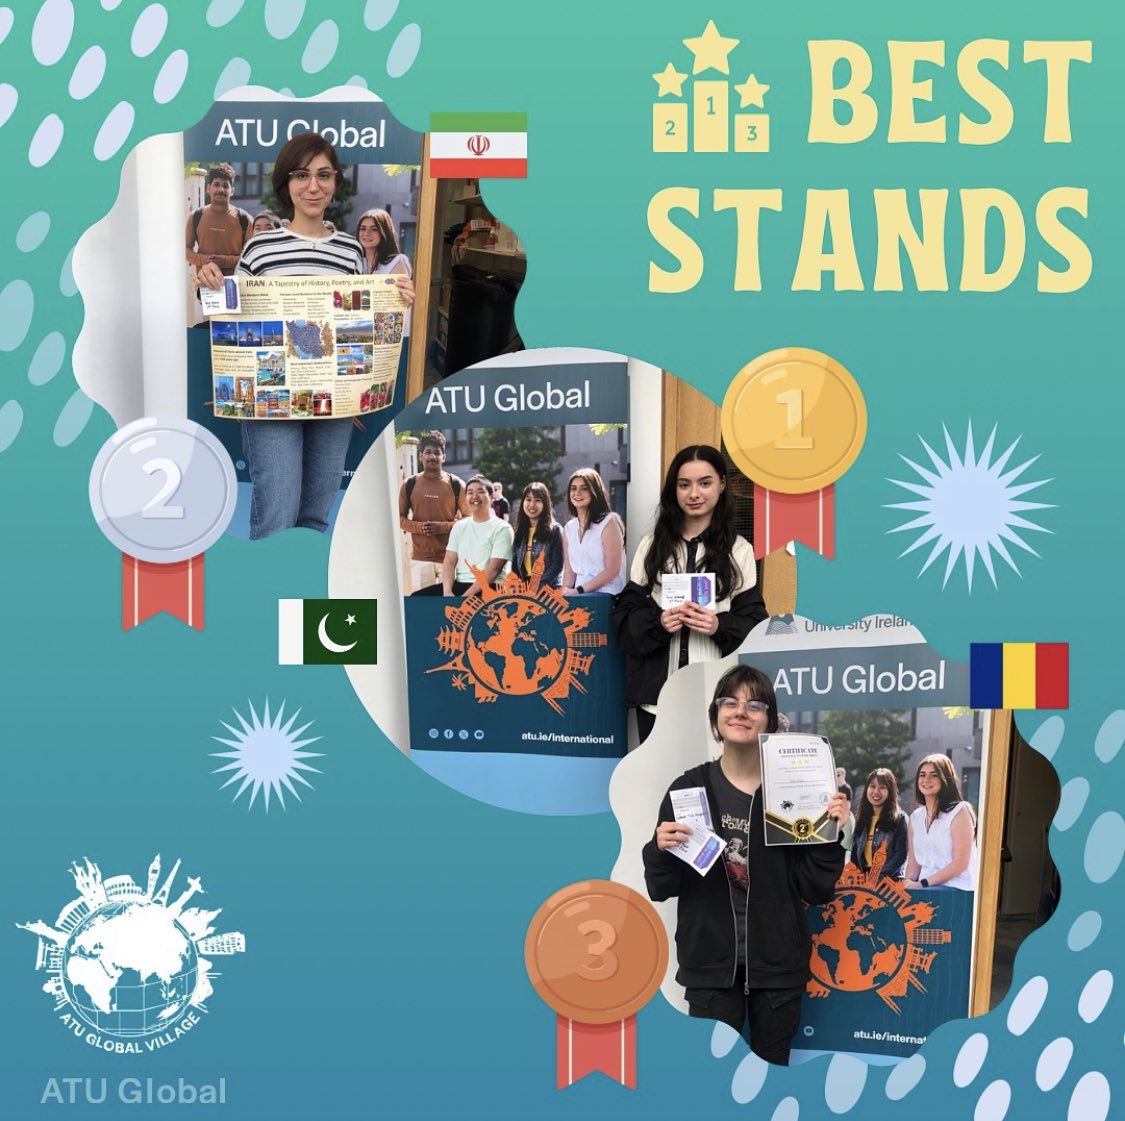 Congratulations 👏 to the winners of the Best Stand Competition @atu_ie Global Village Event held @atusligo_ie 📆 April 16th last. 🥇 Pakistan 🇵🇰 🥈 Iran 🇮🇷🥉 Romania 🇷🇴 #ATUGlobalVillage #ATUCultureWeek